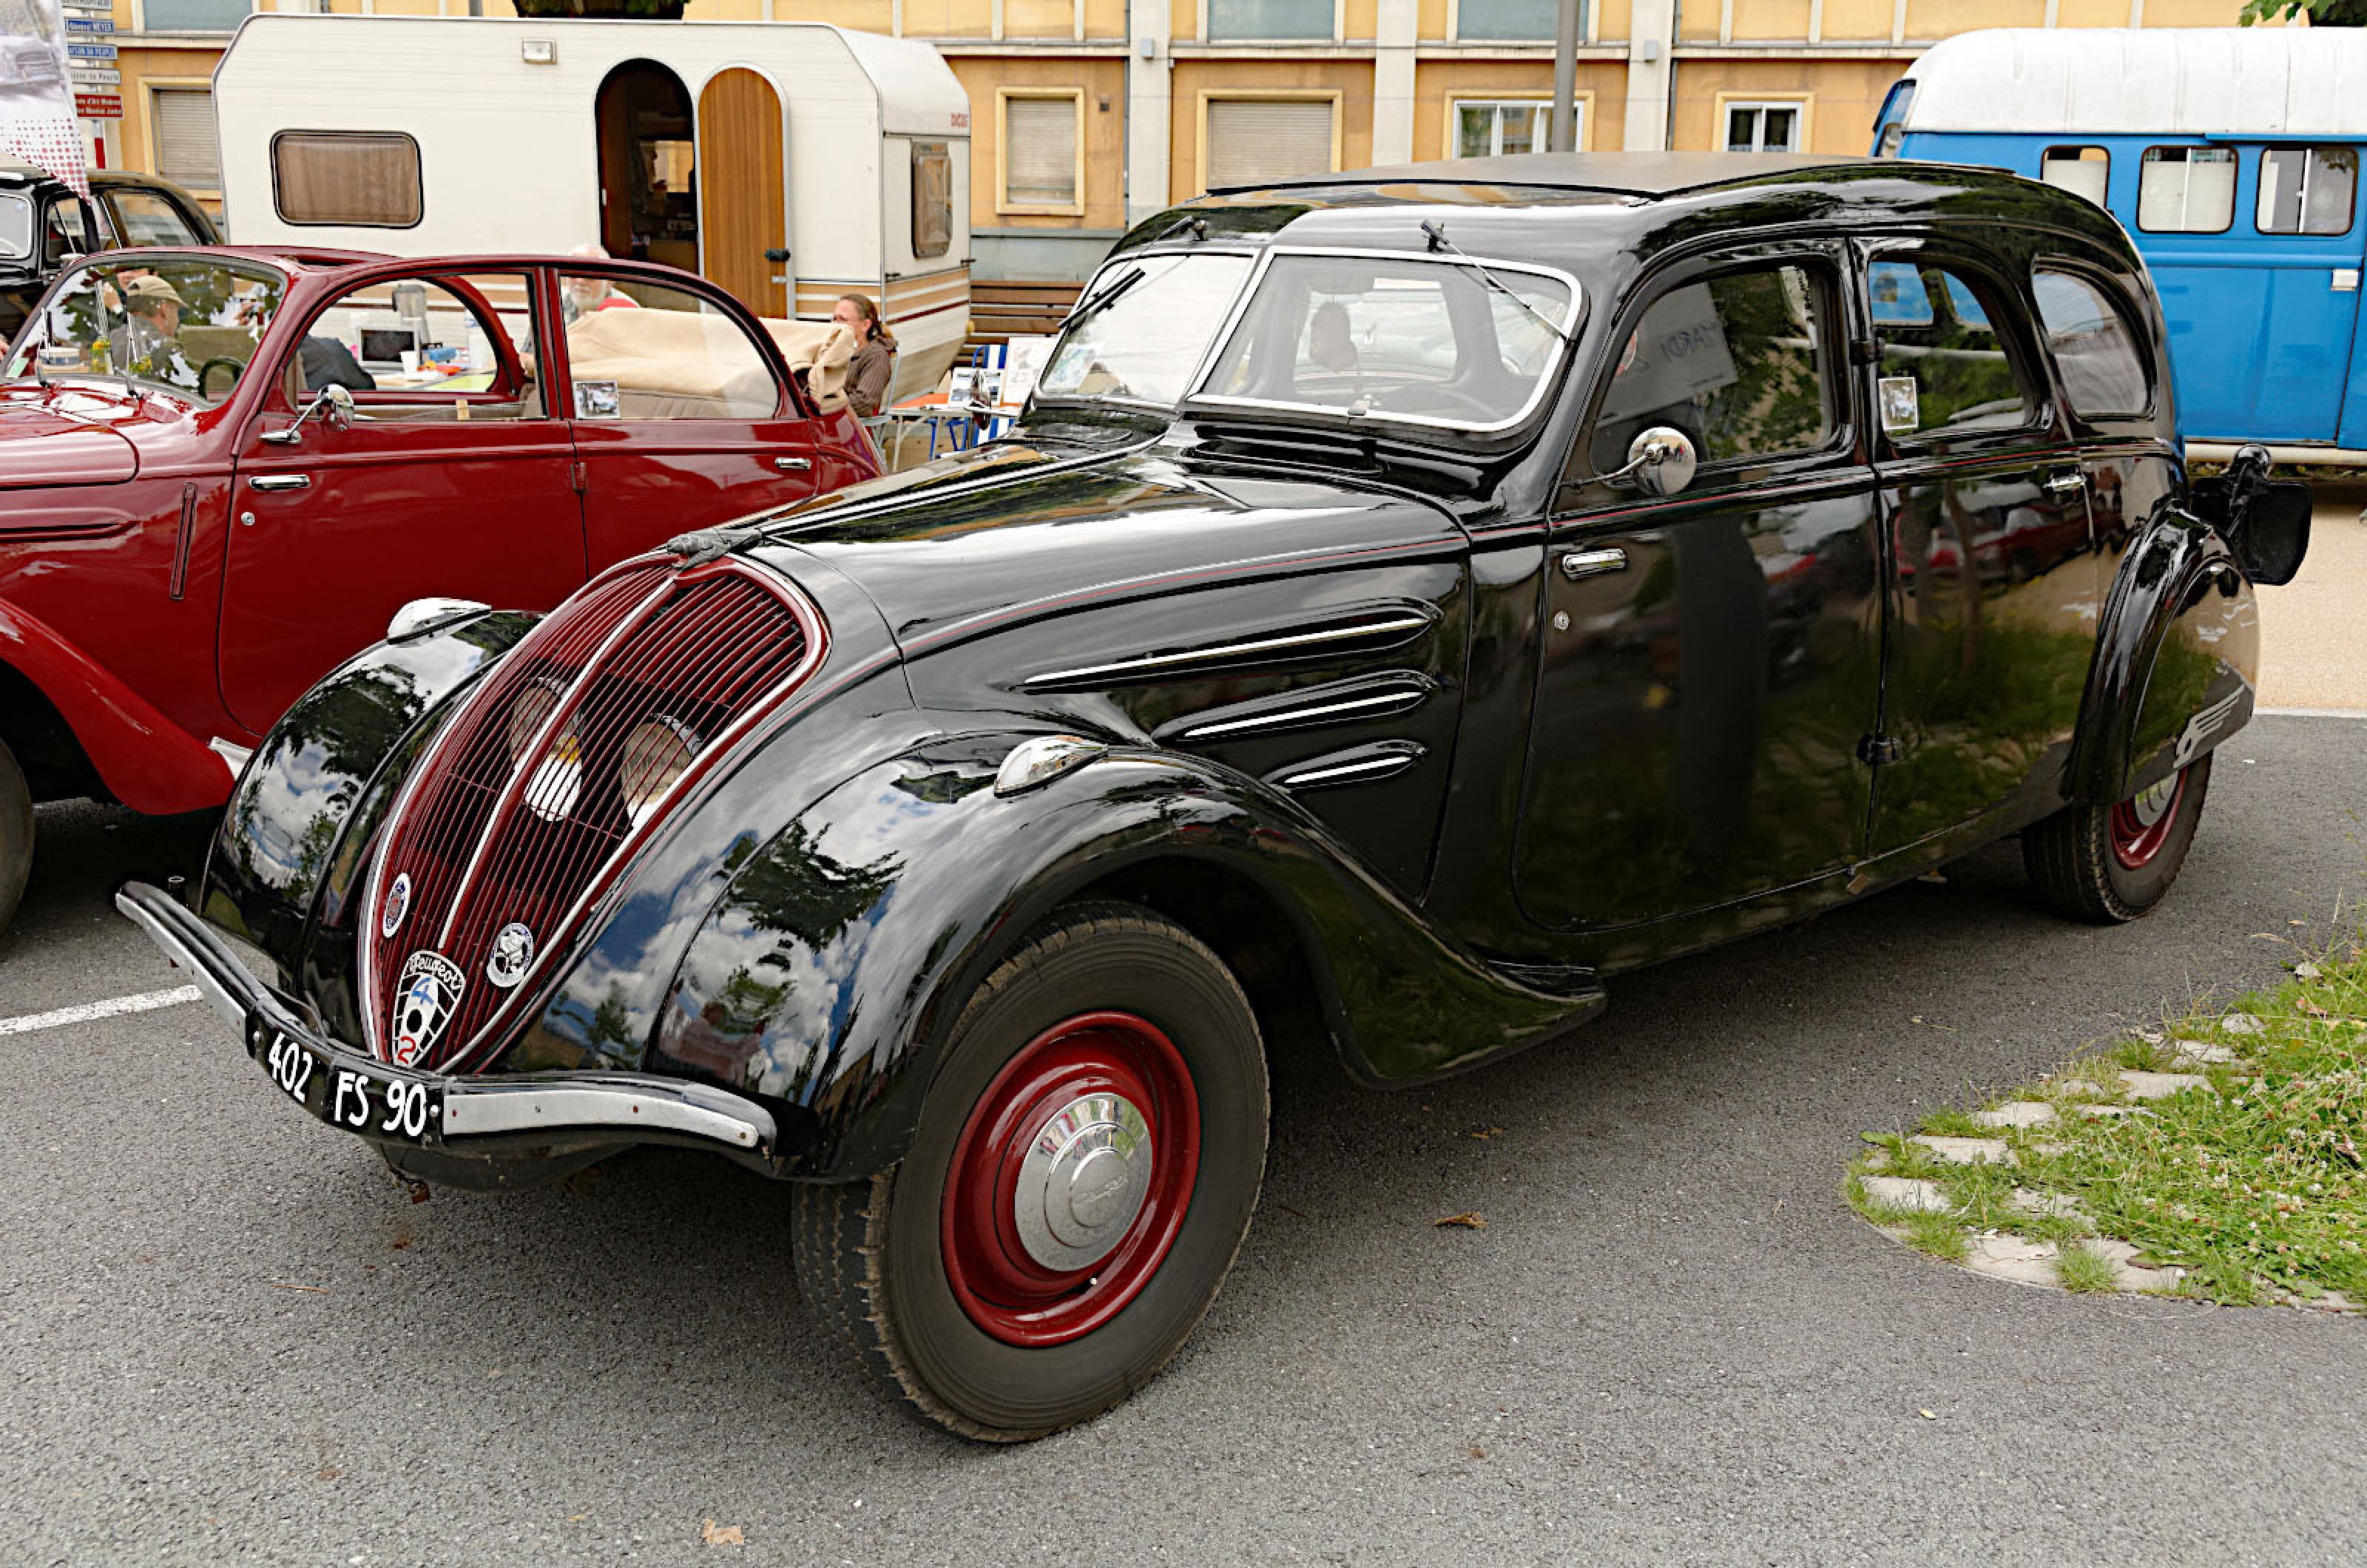 <p>The outstanding styling feature of the Peugeot 402 was the placement of its headlights behind the radiator grille.</p>  <p>Also used on the slightly later 202 and 302, but not copied by any other major auto maker, this was so strange that it’s difficult to pay much attention to anything else.</p>  <p>However, if you can drag your eyes away from the unusual lighting arrangement, and ignore the prominent chin and lack of running boards, you’ll see that the 402’s body shape is very similar to that of the much larger 1934 Chrysler Airflow.</p>  <p>The Airflow is rightly hailed as one of the first mainstream cars whose body was designed on aerodynamic principles, but the 402 shows that Peugeot was either thinking along remarkably similar lines or paying very close attention to what was happening on the other side of the Atlantic Ocean.</p>